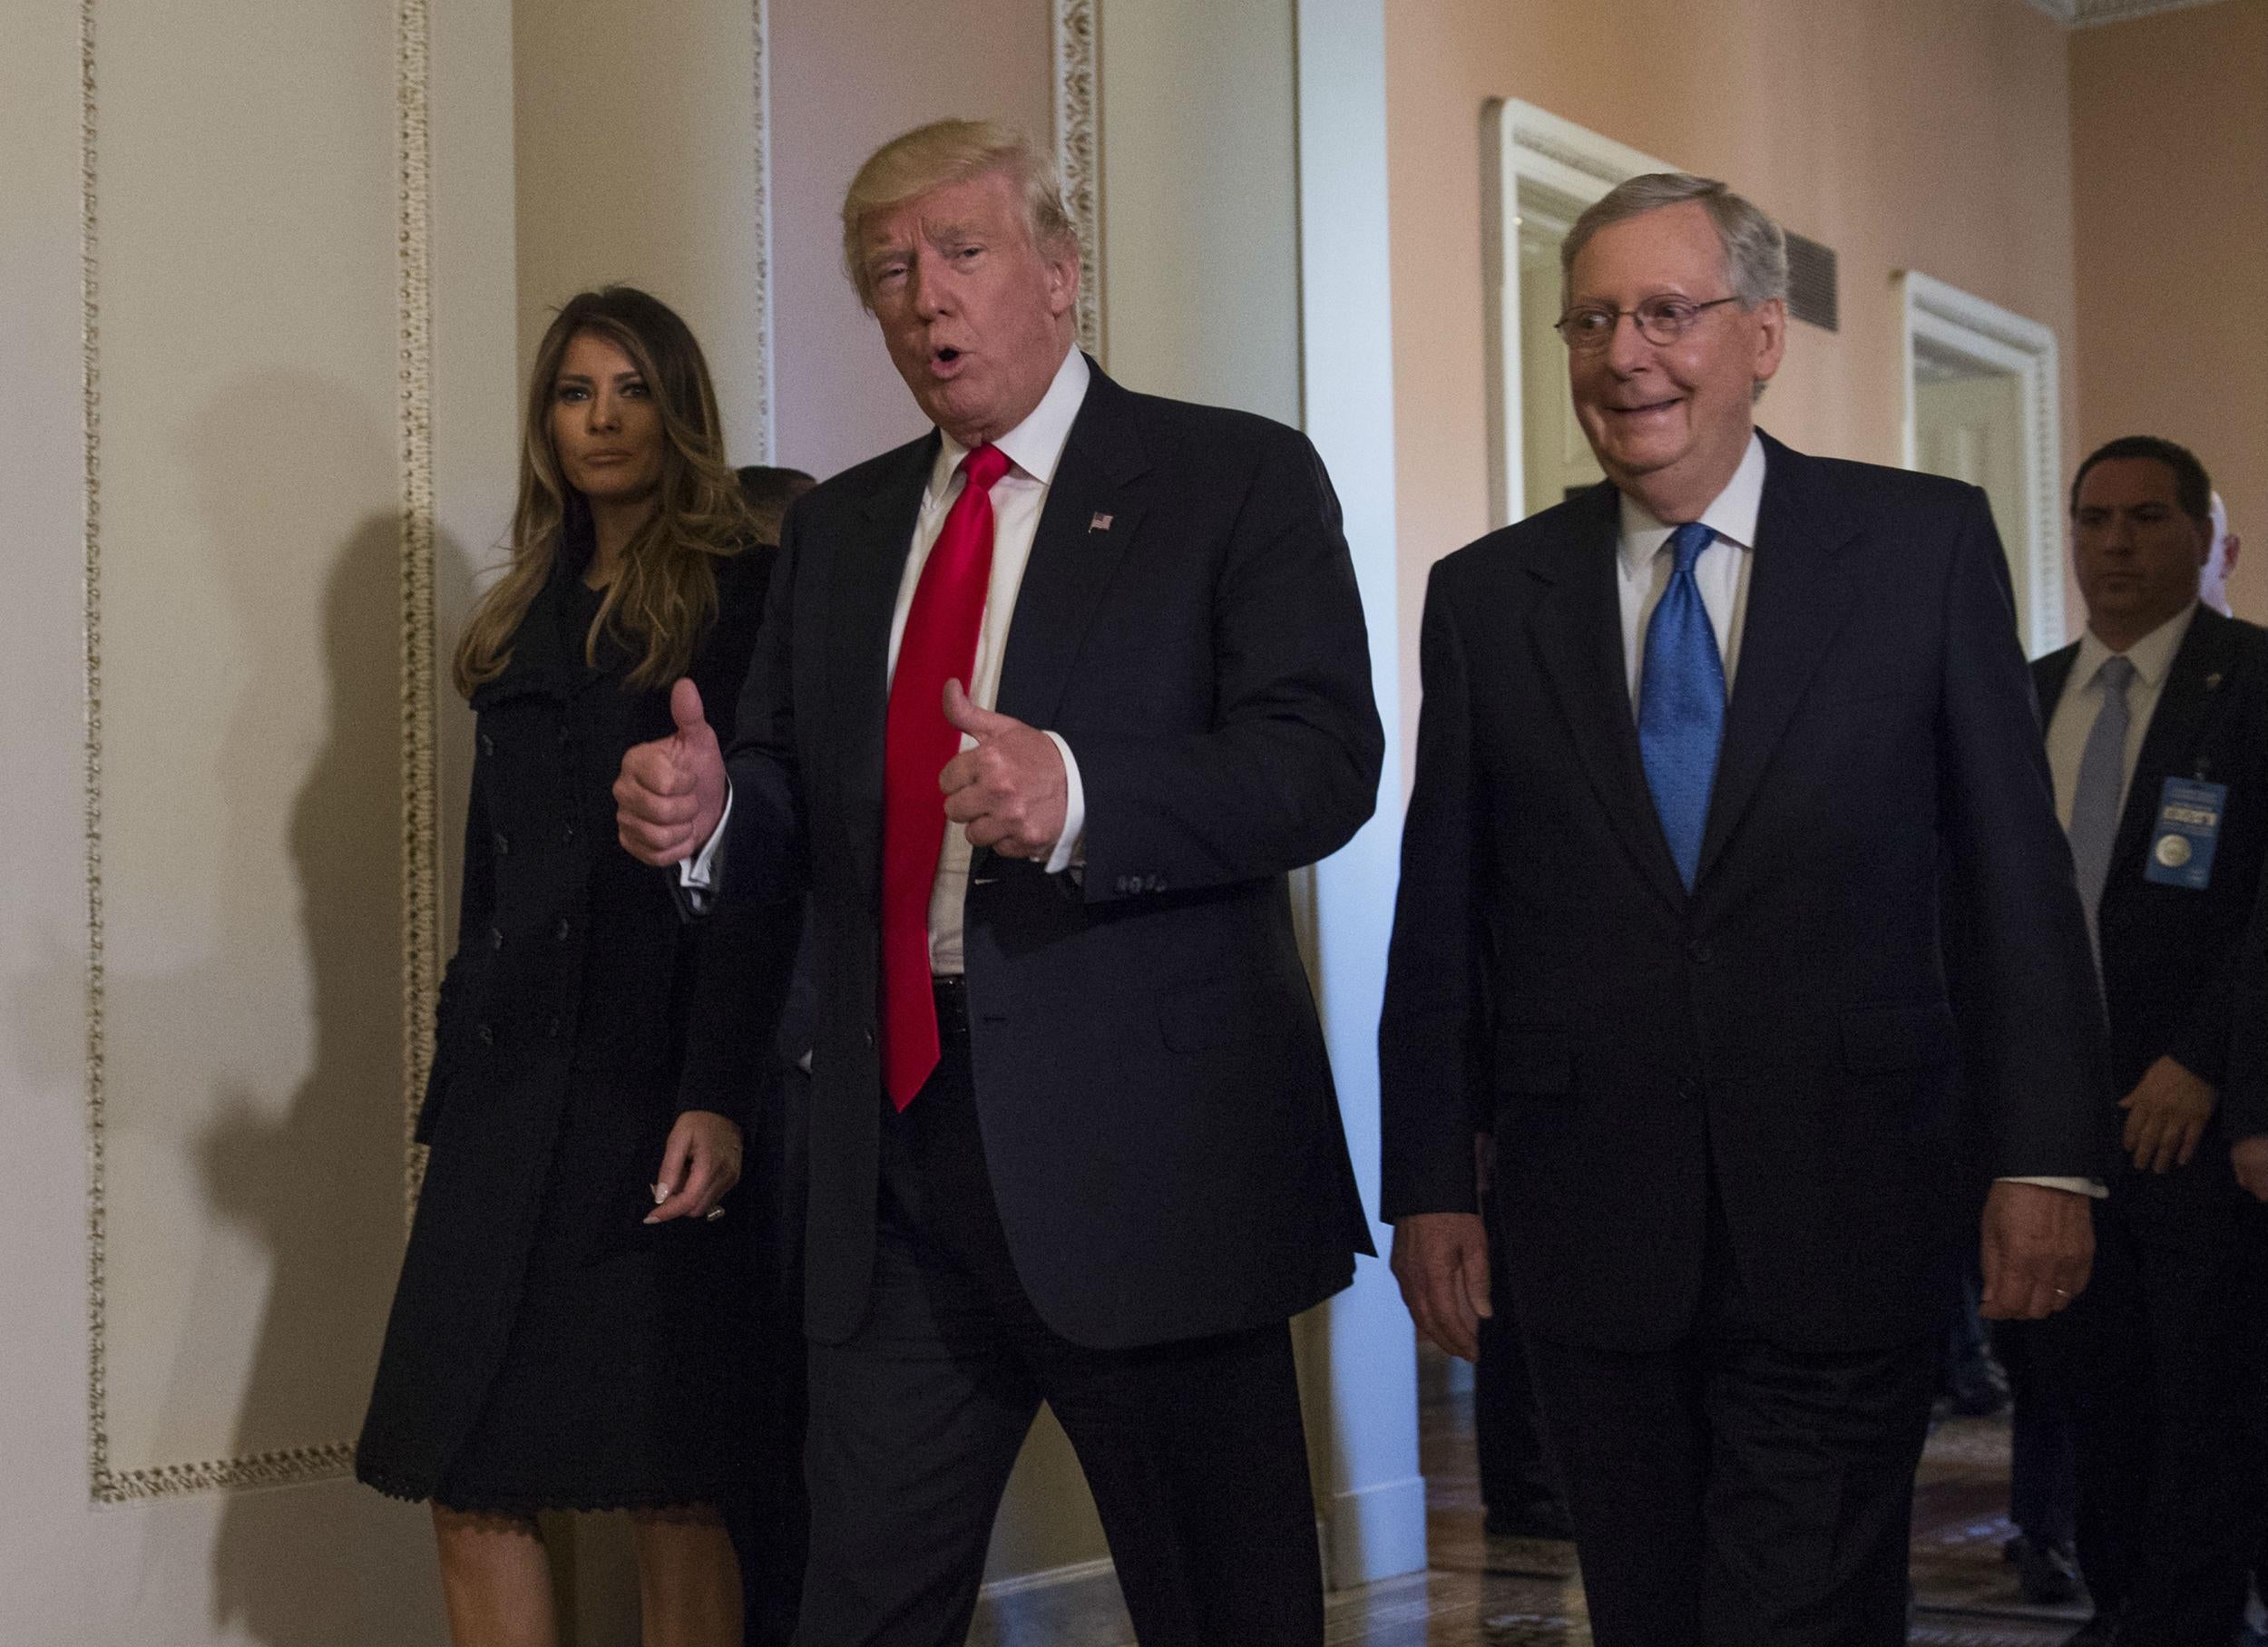 Donald Trump and his wife escorted by Mitch McConnell through the halls of Congress on Thursday